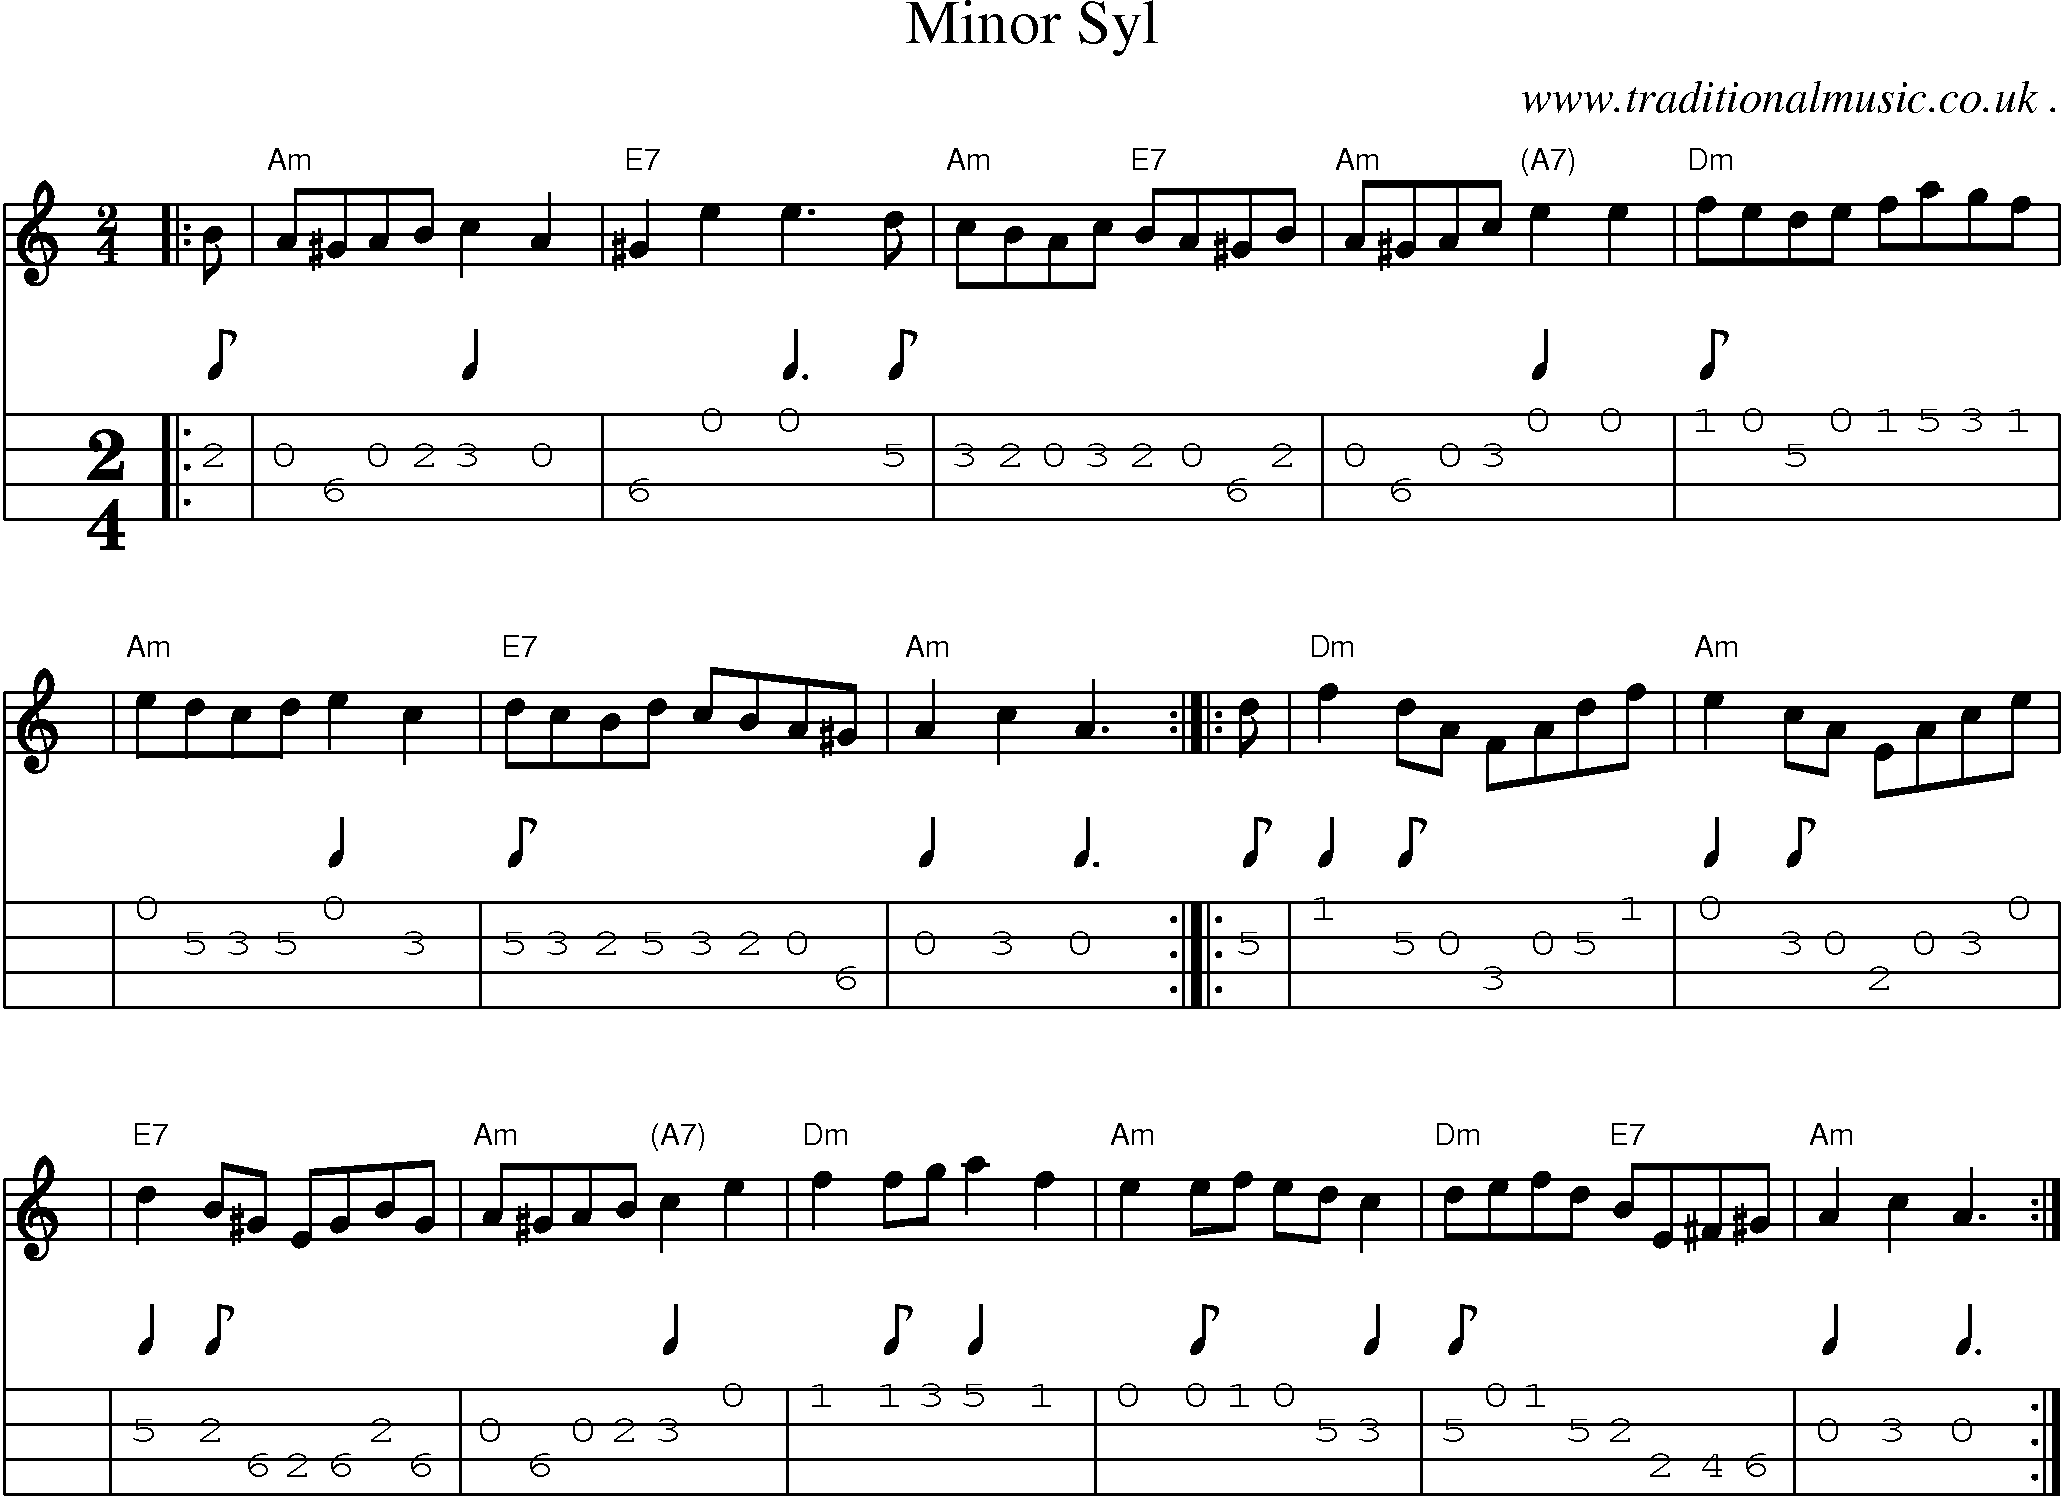 Sheet-music  score, Chords and Mandolin Tabs for Minor Syl